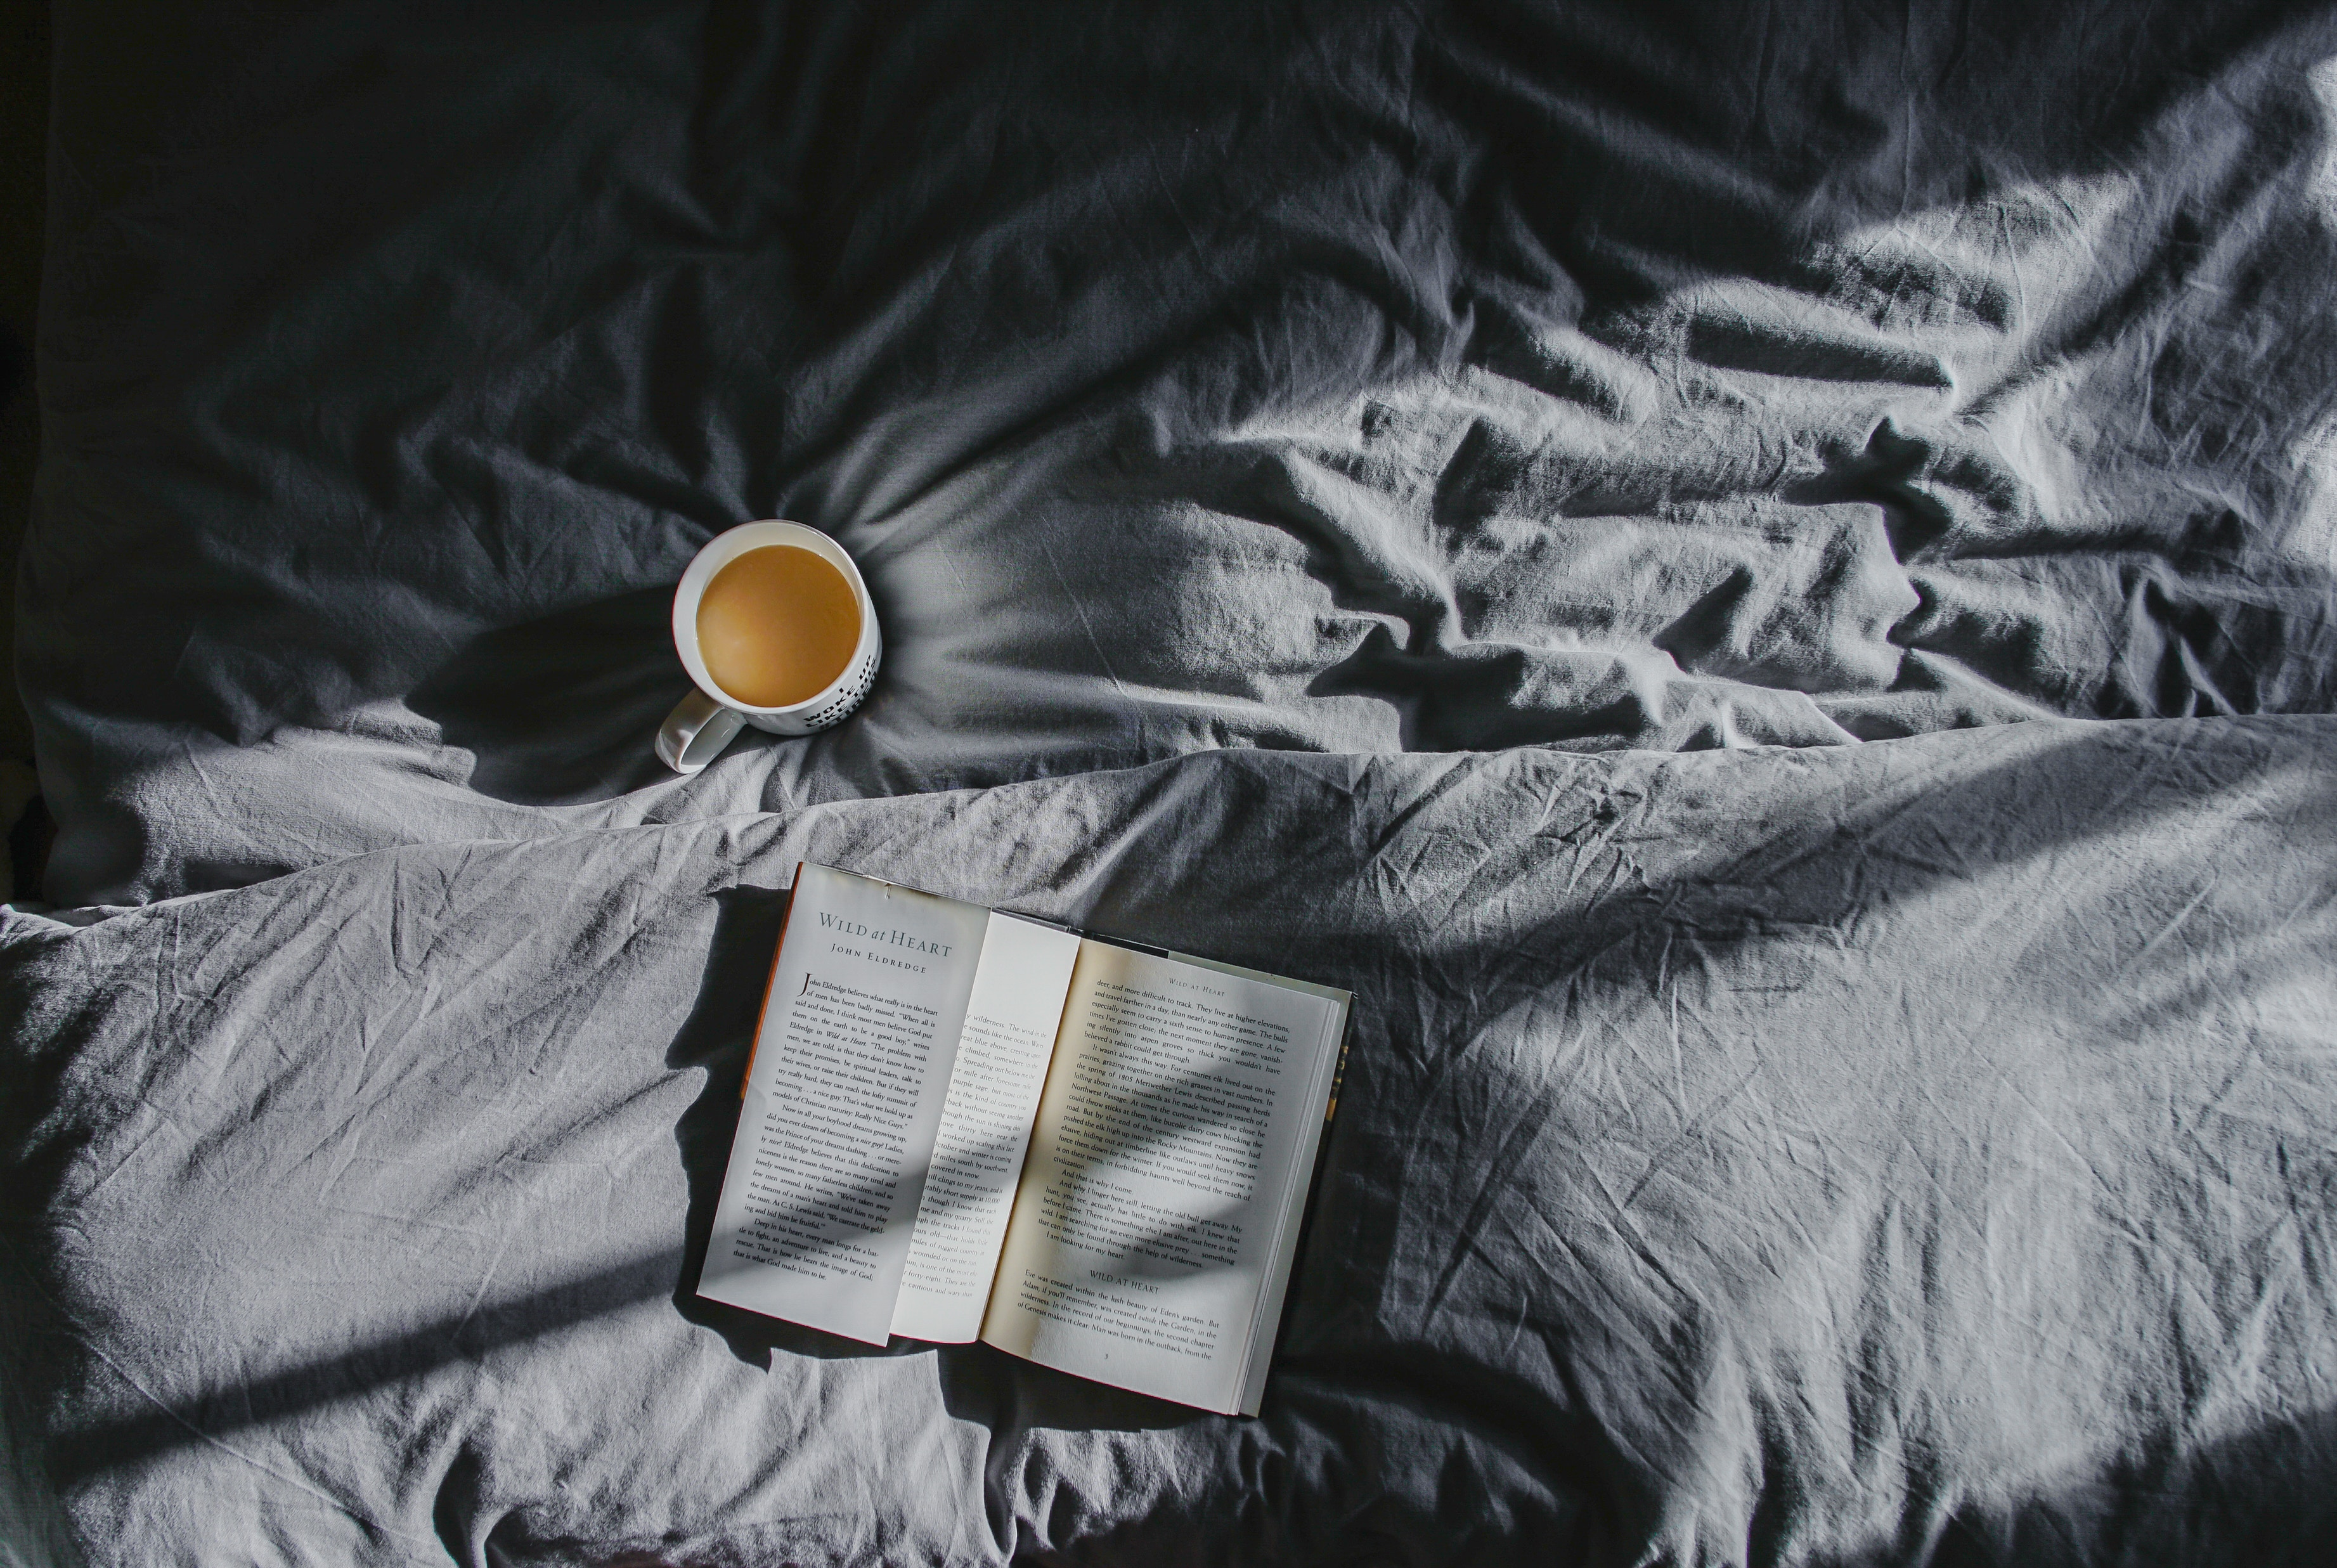 coffee, miscellaneous, miscellanea, shadow, book, bed Full HD